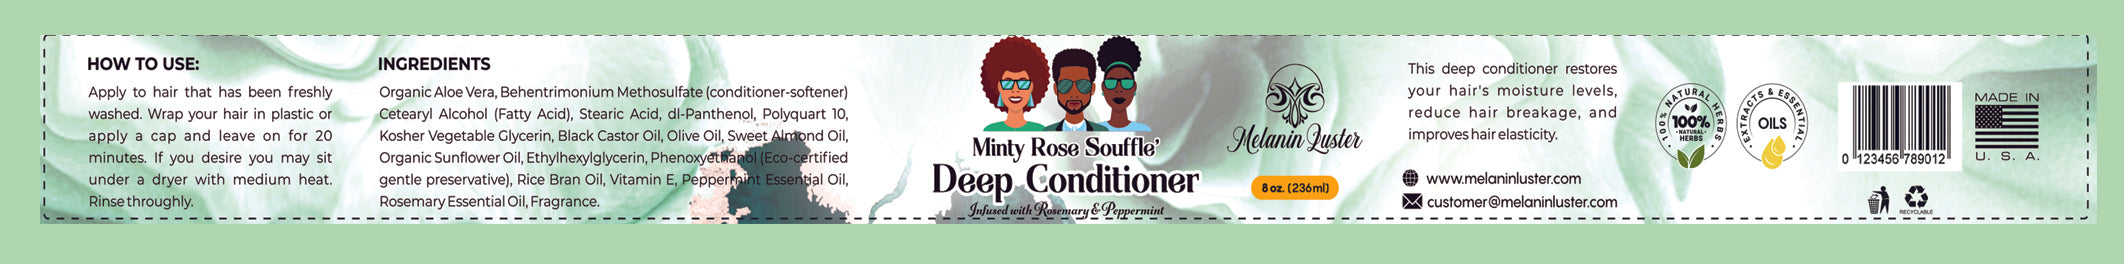 Minty Rose Souffle' Deep Conditioner